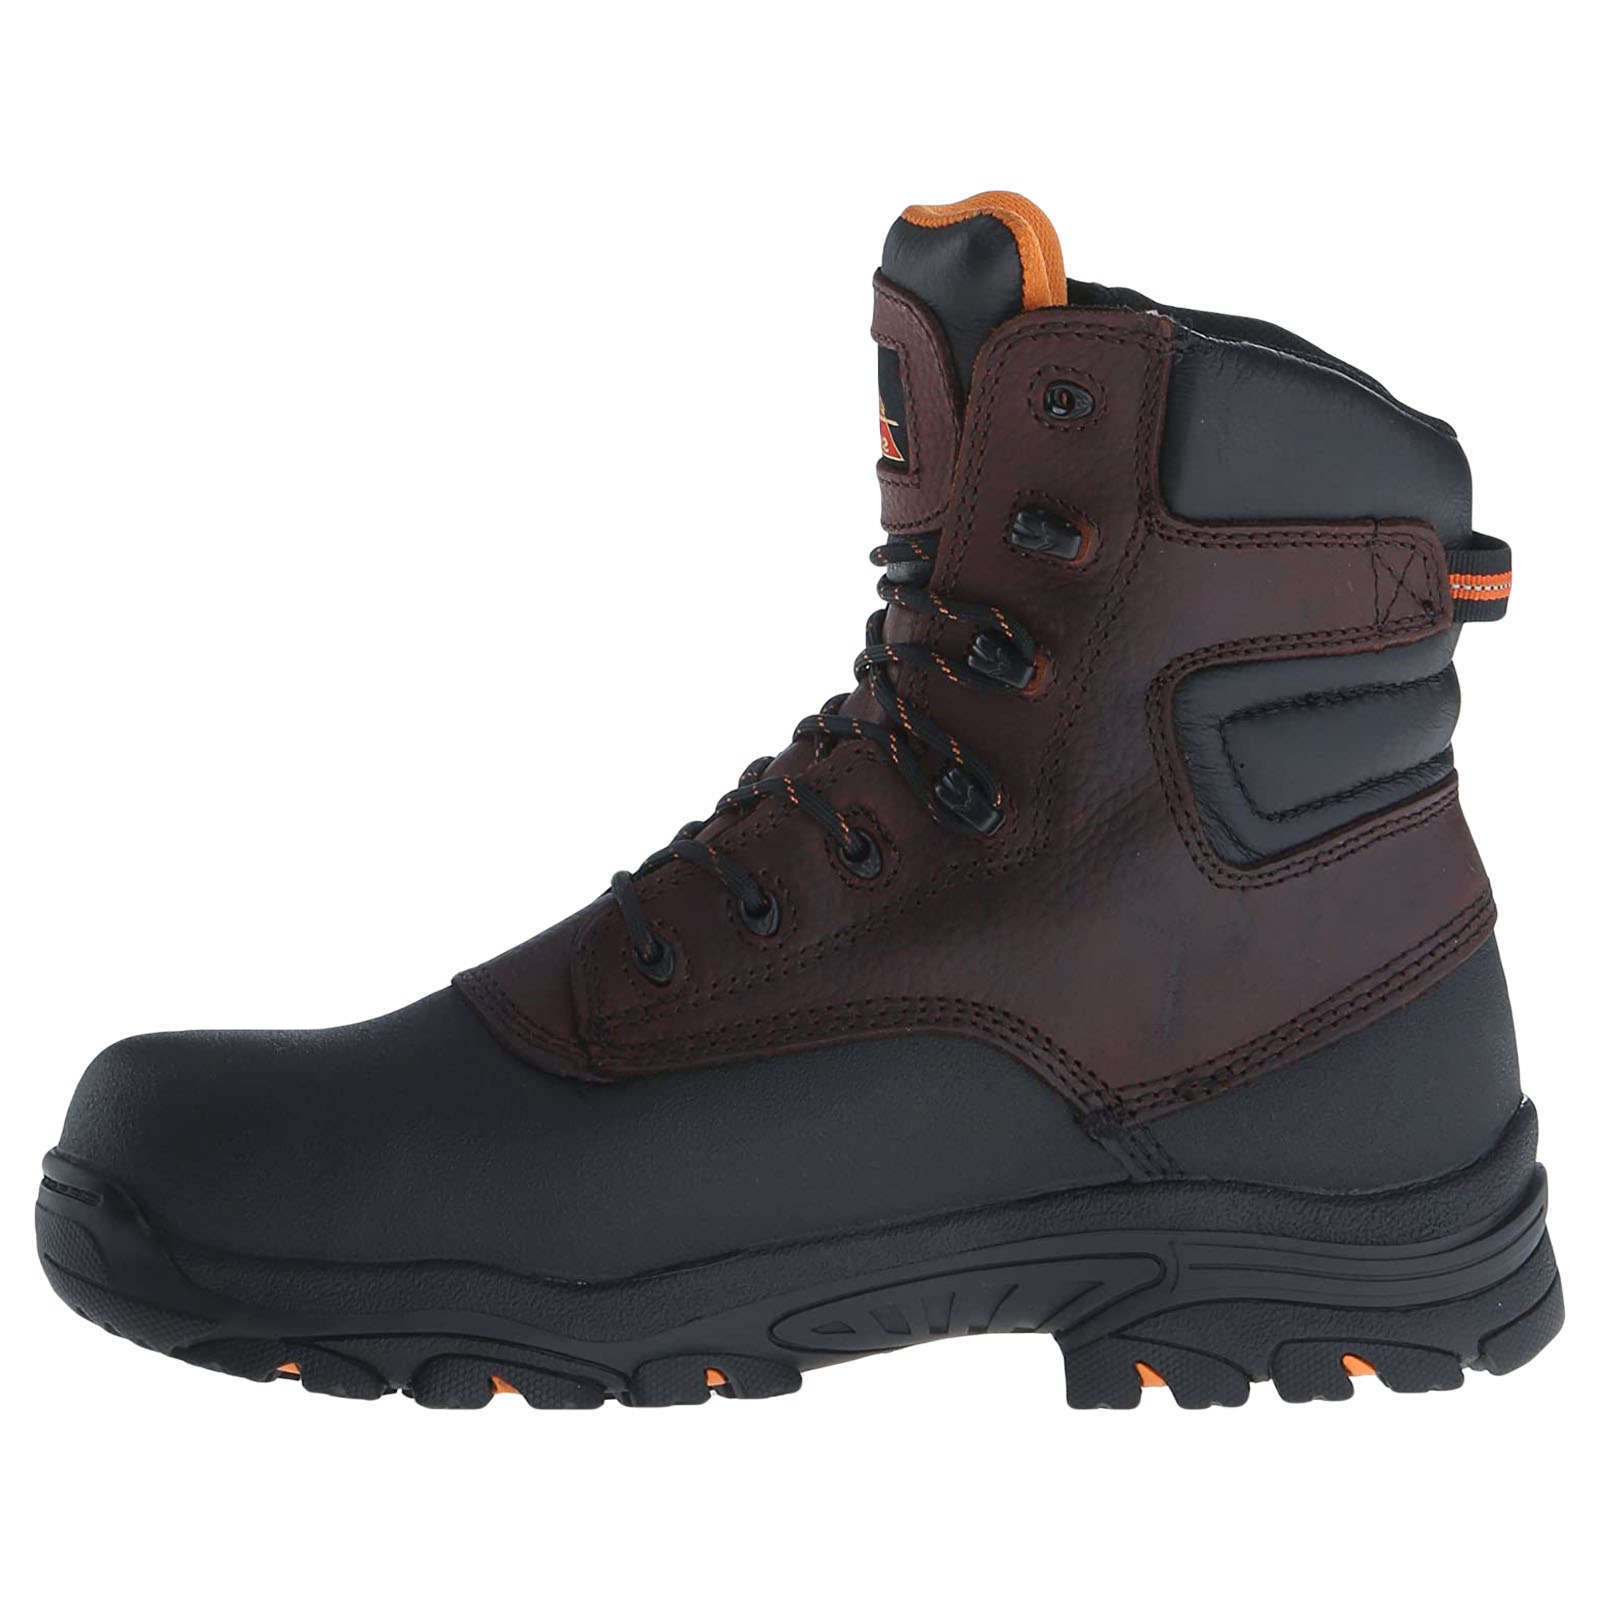 Thorogood Z-Trac 7 Inch Leather Men's Composite Safety Toe Boots